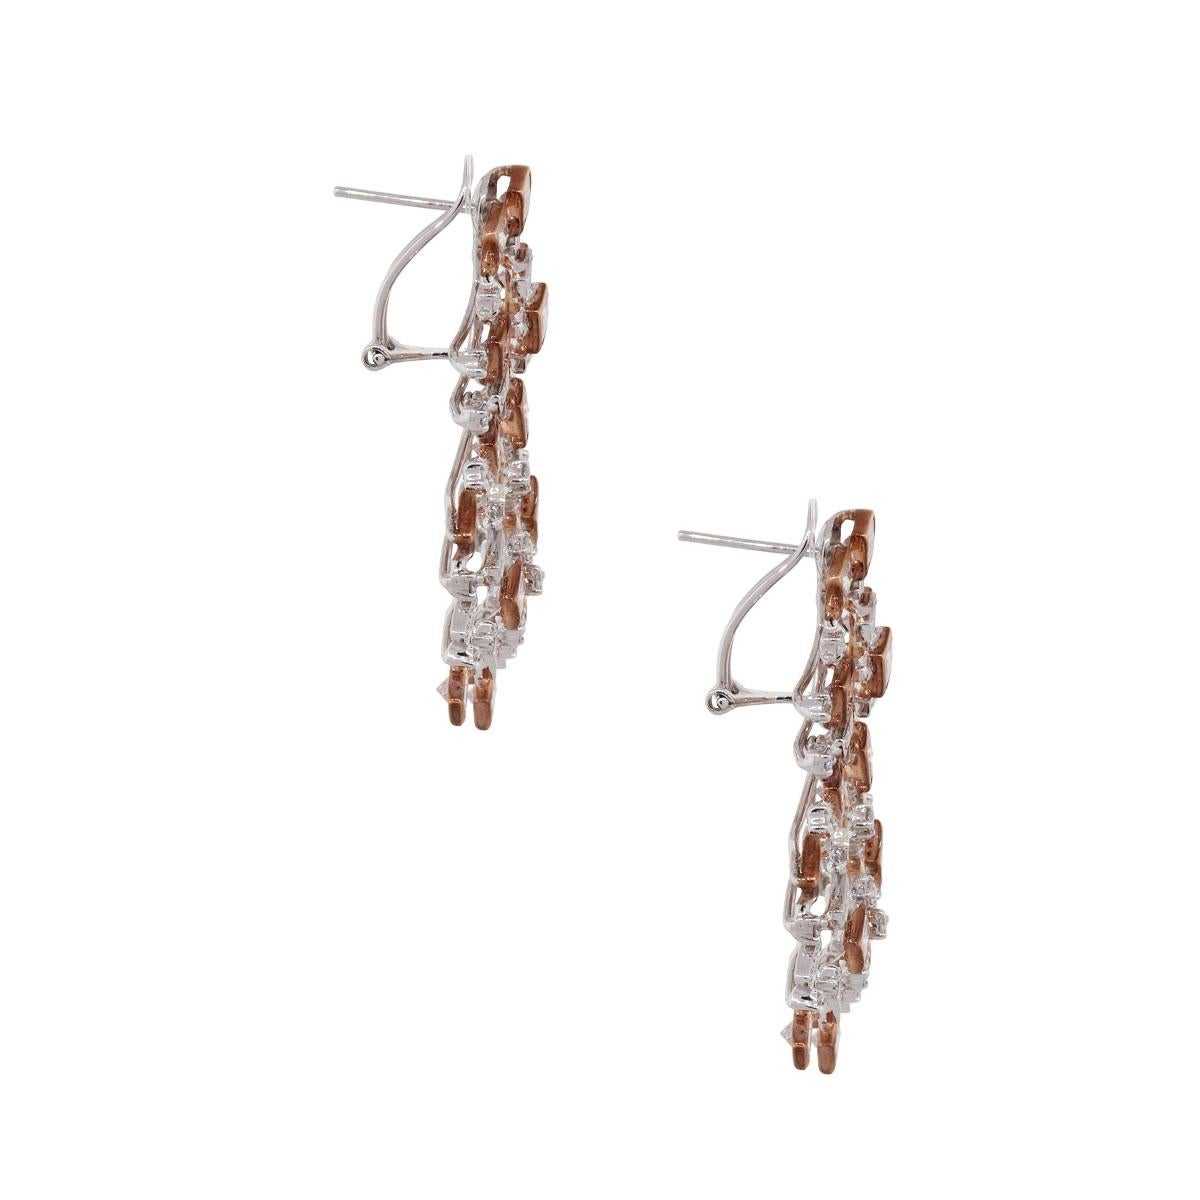 Material: 18k white and rose gold
Diamond Details: Approximately 1.12ctw of white round brilliant diamonds and approximately 5.10ctw of princess cut natural pink diamonds.
Earring Measurements: 1.68″ x 0.23″ x 0.89″
Earring Backs: Omega back